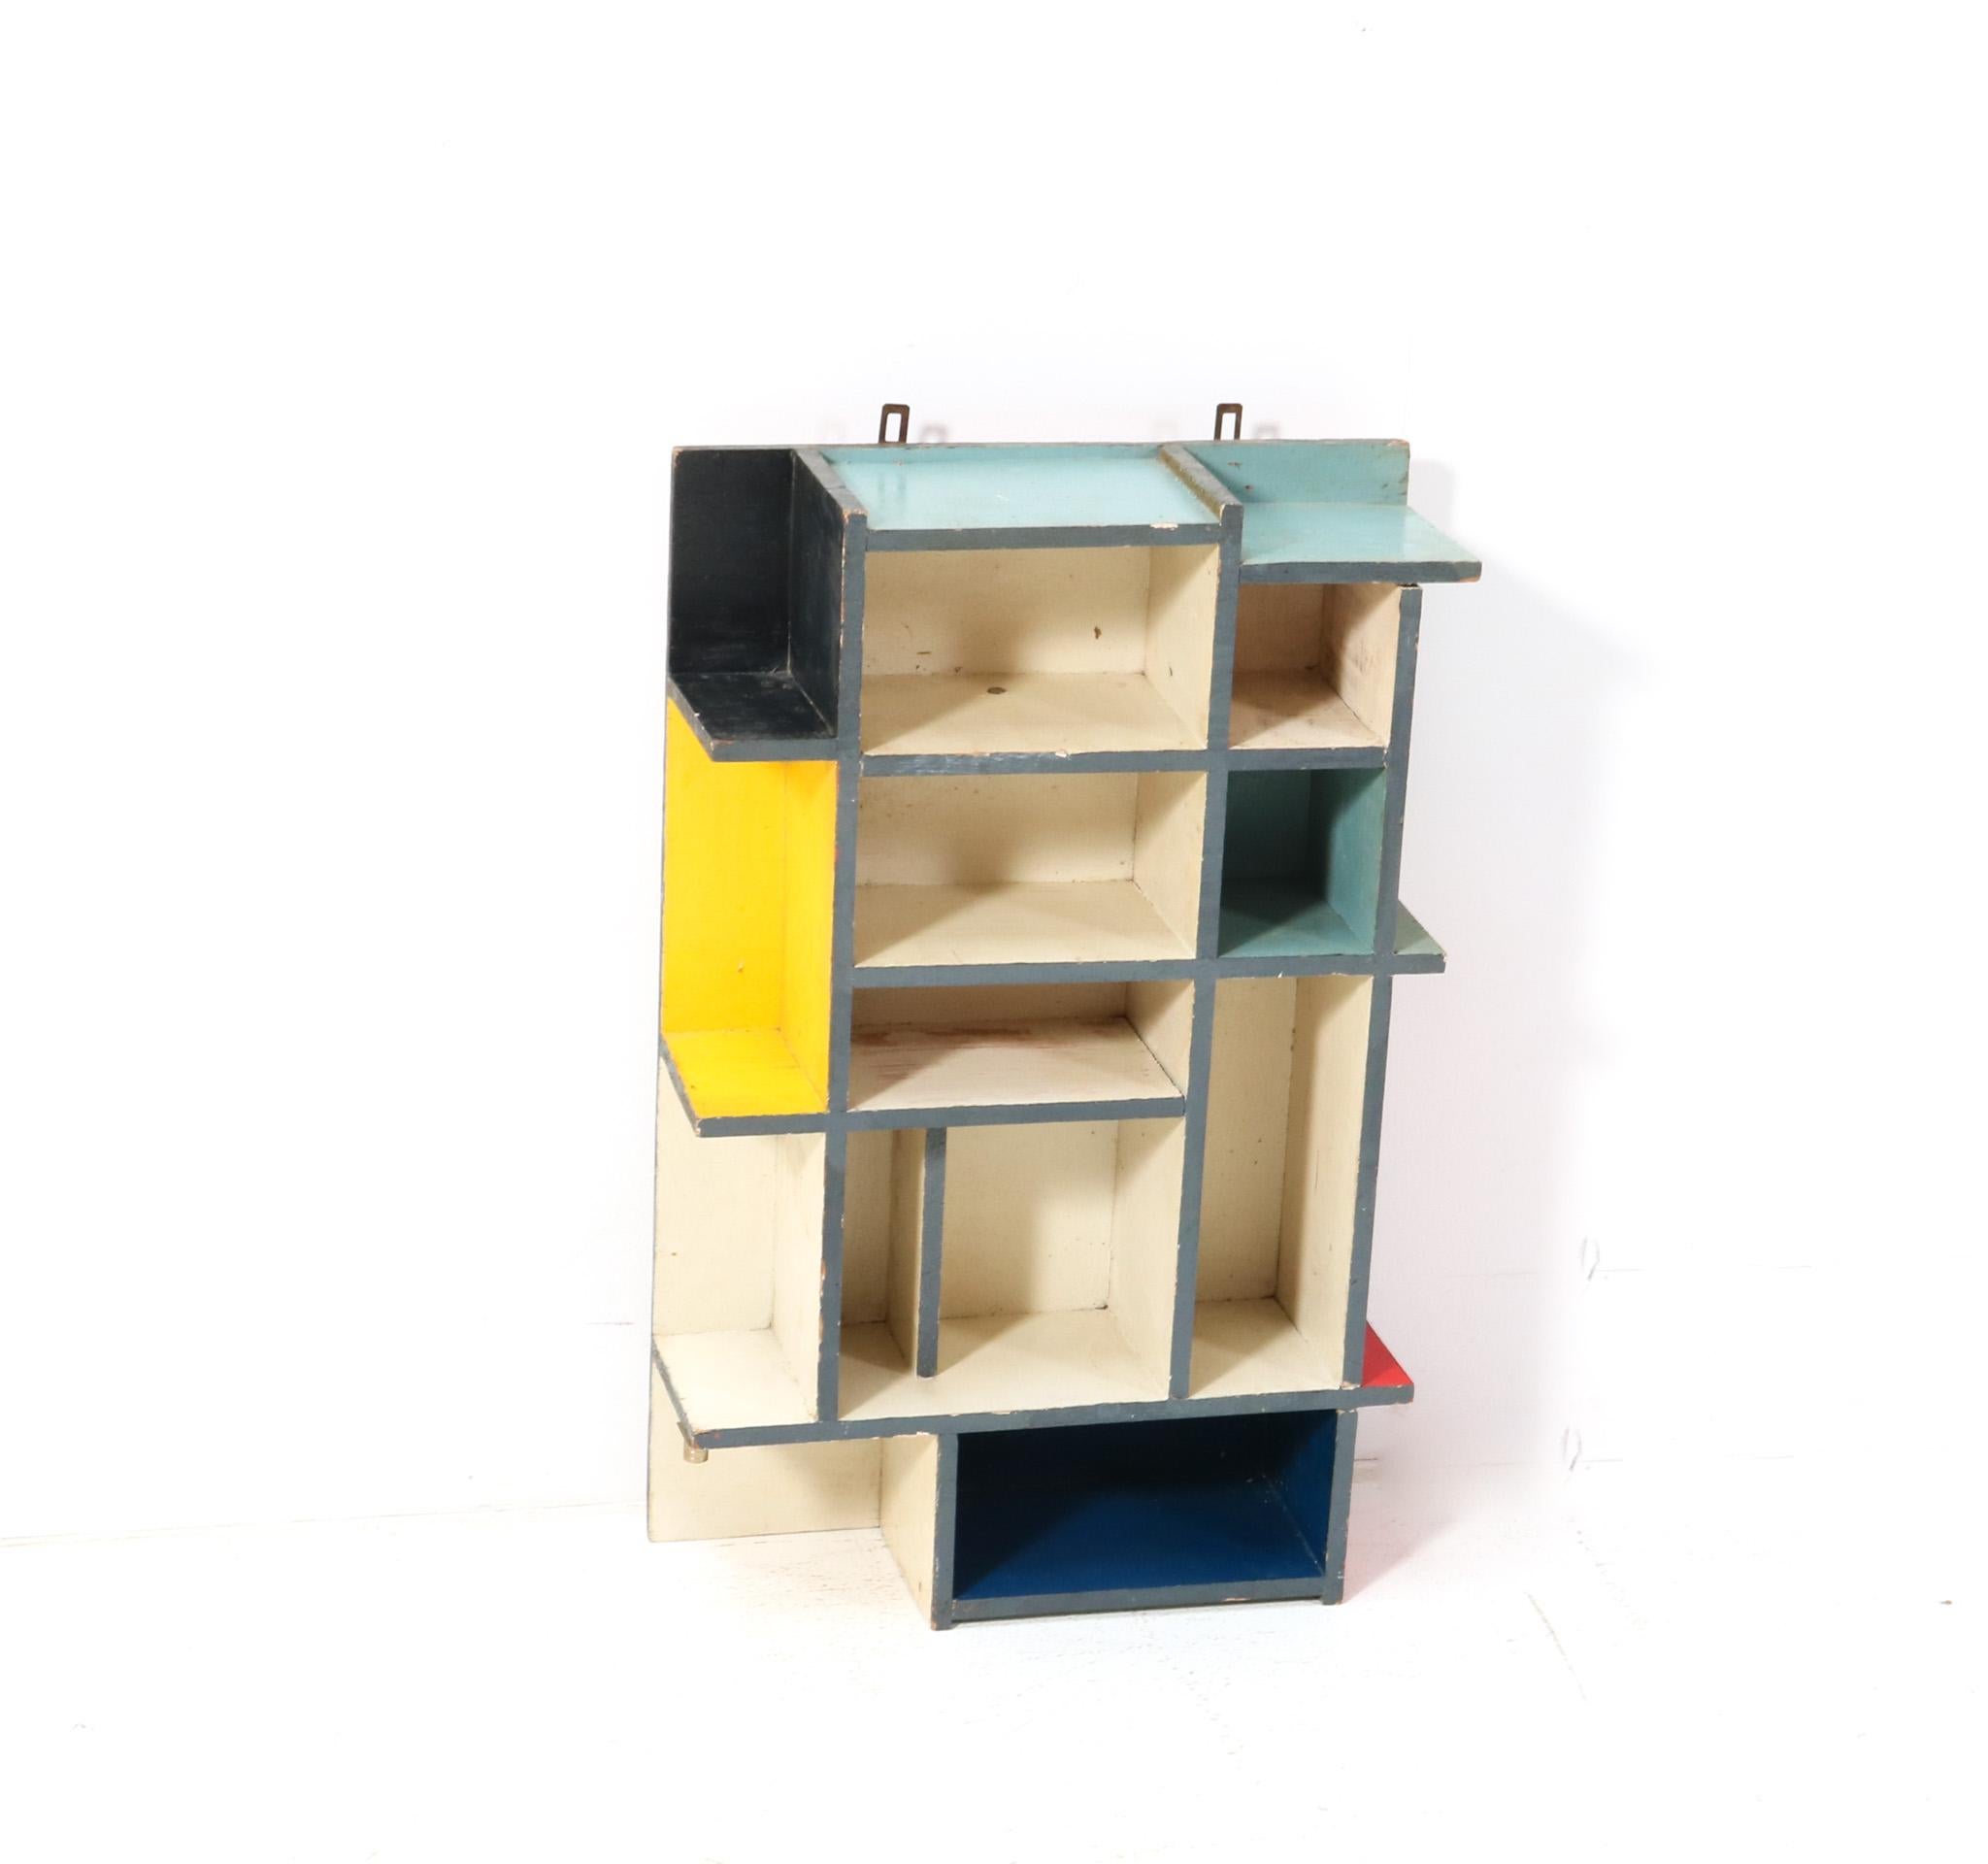 Stunning and rare Art Deco Modernist De Stijl wall cabinet.
Striking Dutch design from the 1940s.
Original hand-painted plywood frame in the typical De Stijl colors.
In very good original condition with minor wear consistent with age and use,